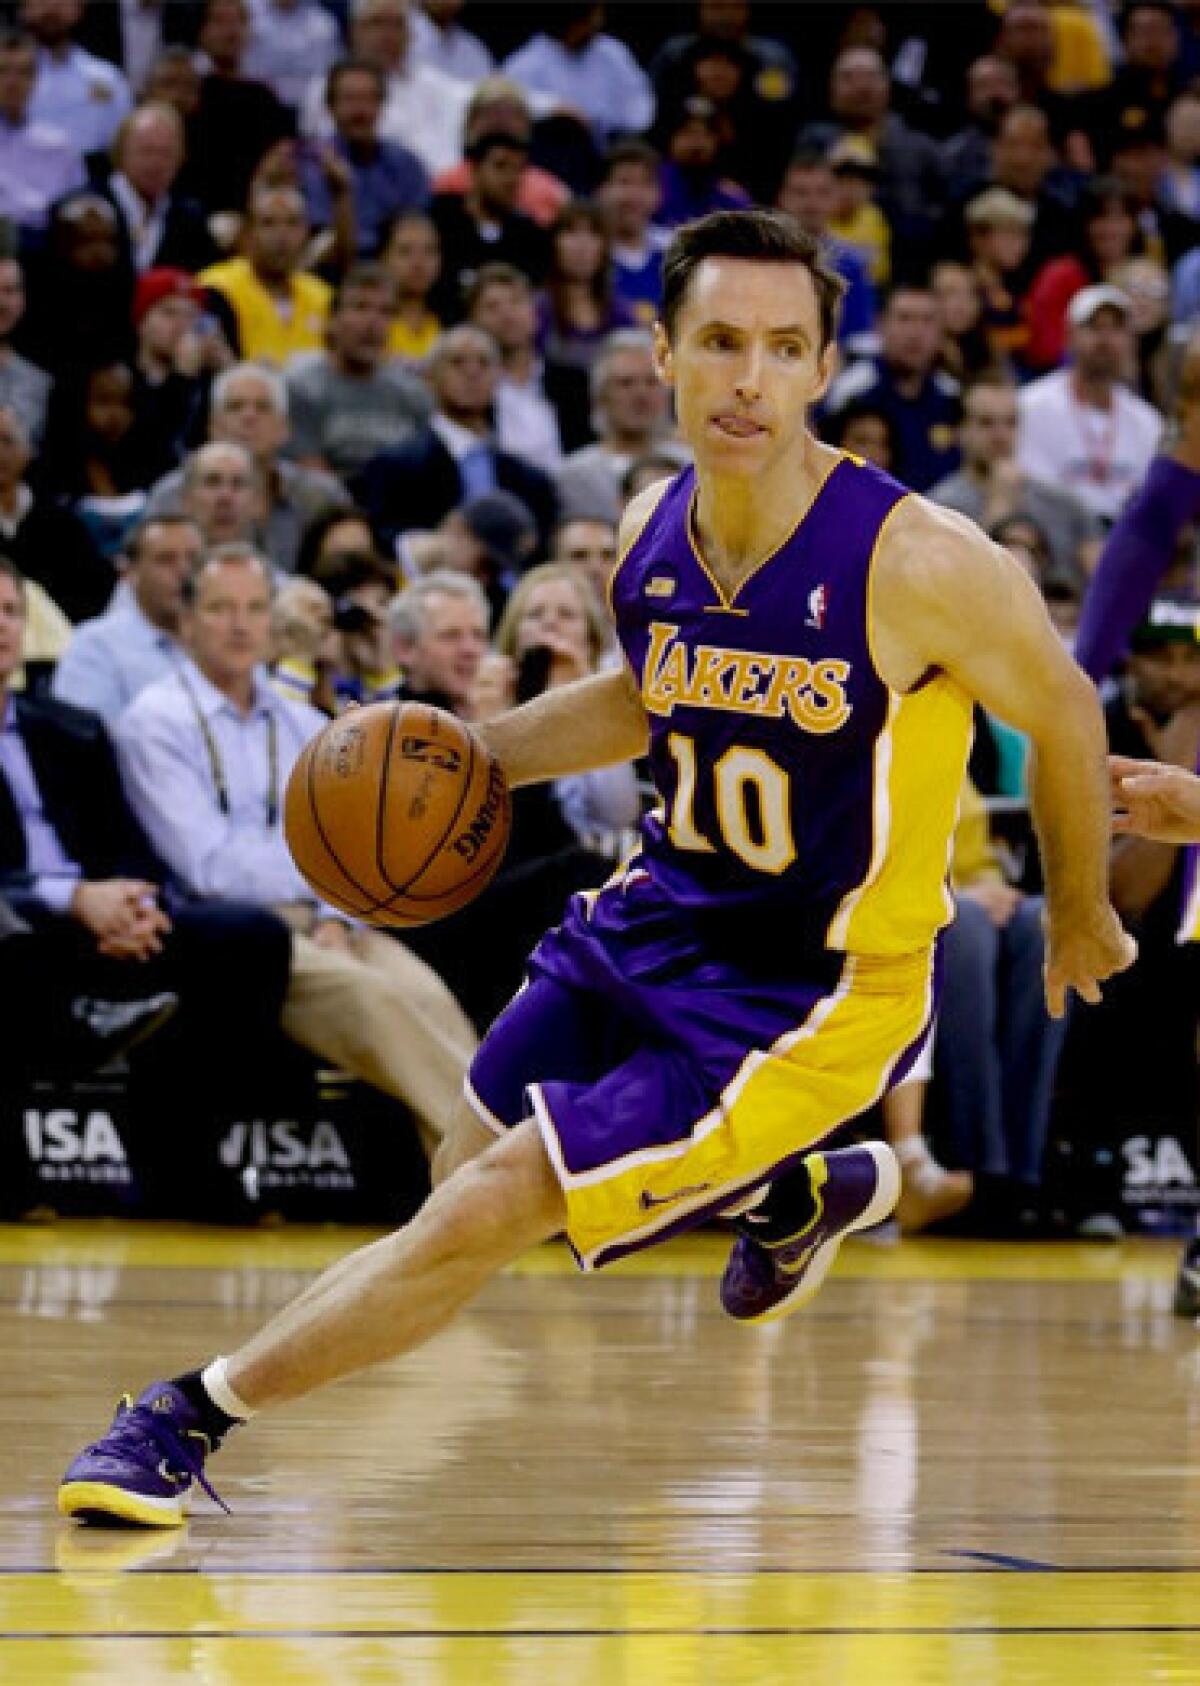 Steve Nash, oldest player in NBA, says 'I've got a lot to prove